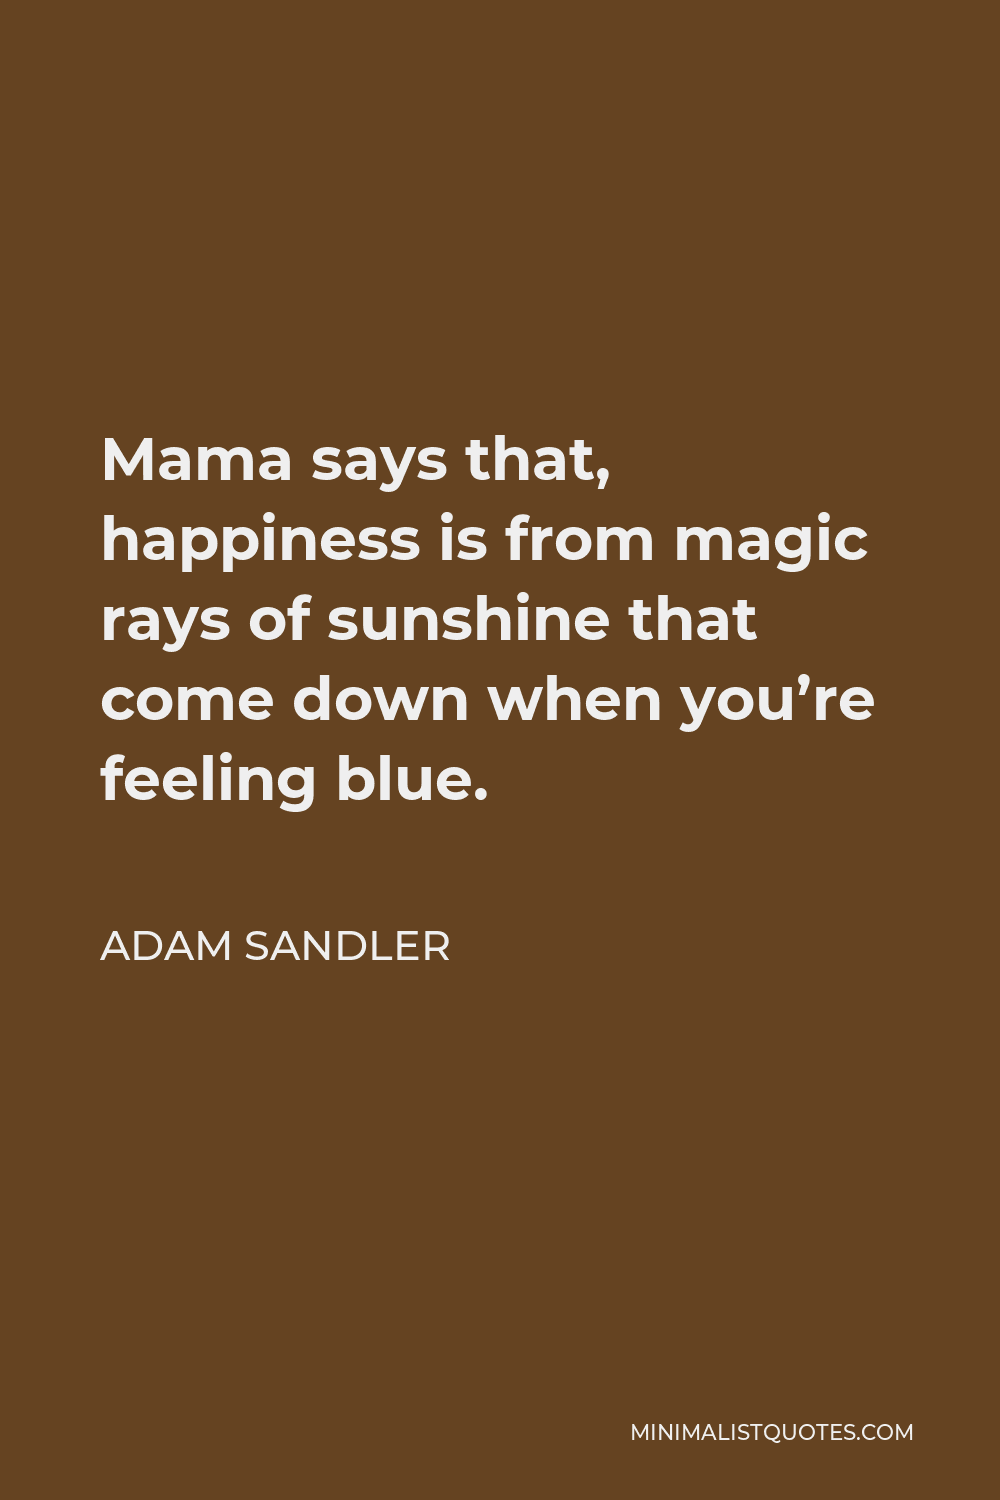 Adam Sandler Quote - Mama says that, happiness is from magic rays of sunshine that come down when you’re feeling blue.